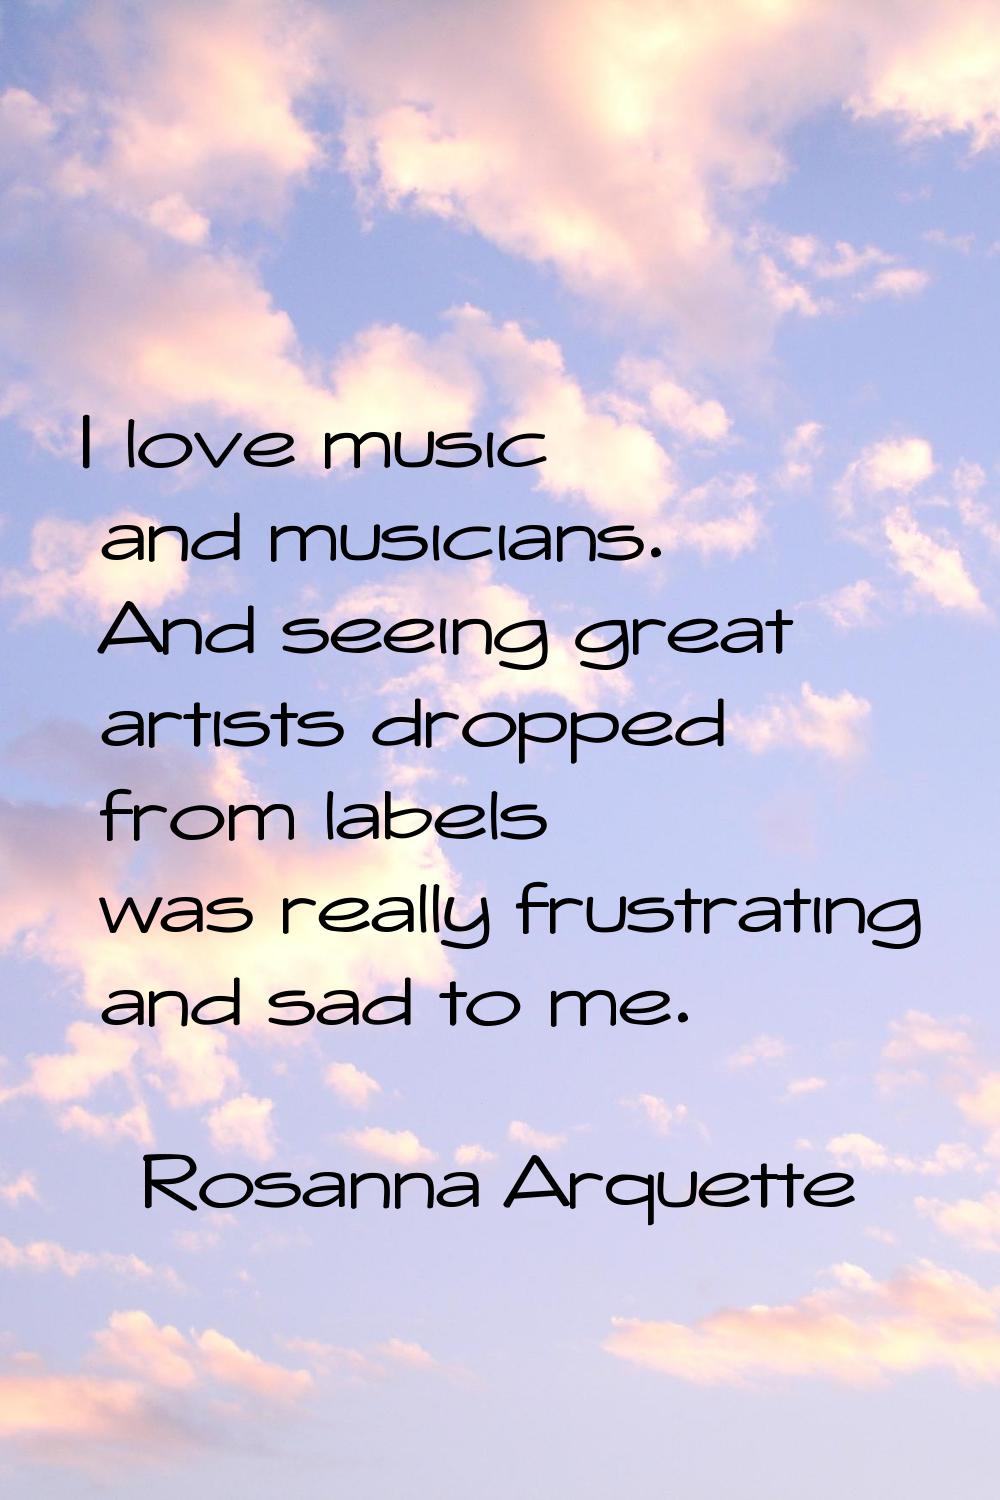 I love music and musicians. And seeing great artists dropped from labels was really frustrating and